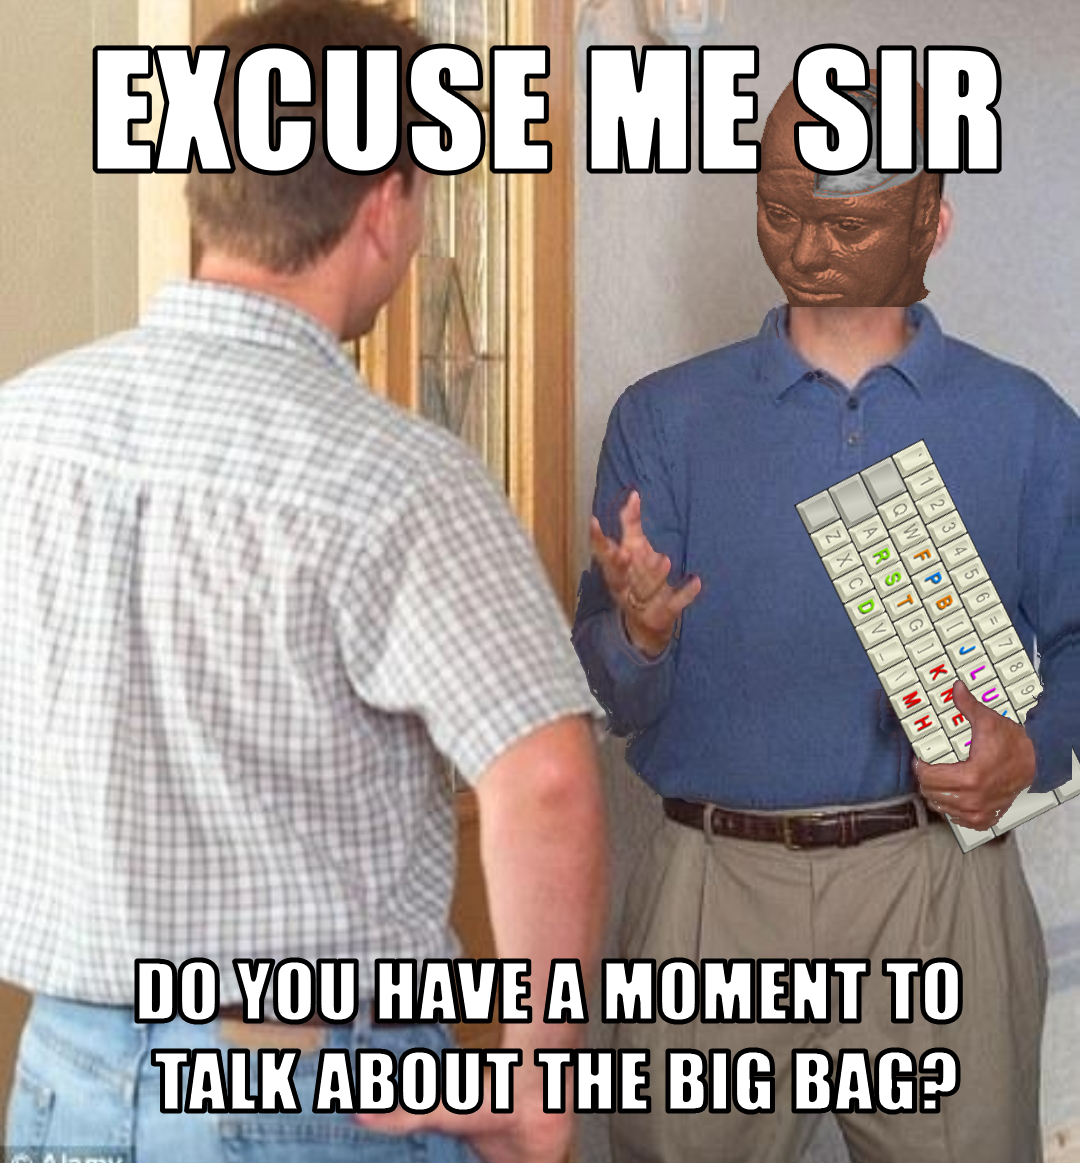 Excuse me sir – do you have a moment to talk about the Big Bag?